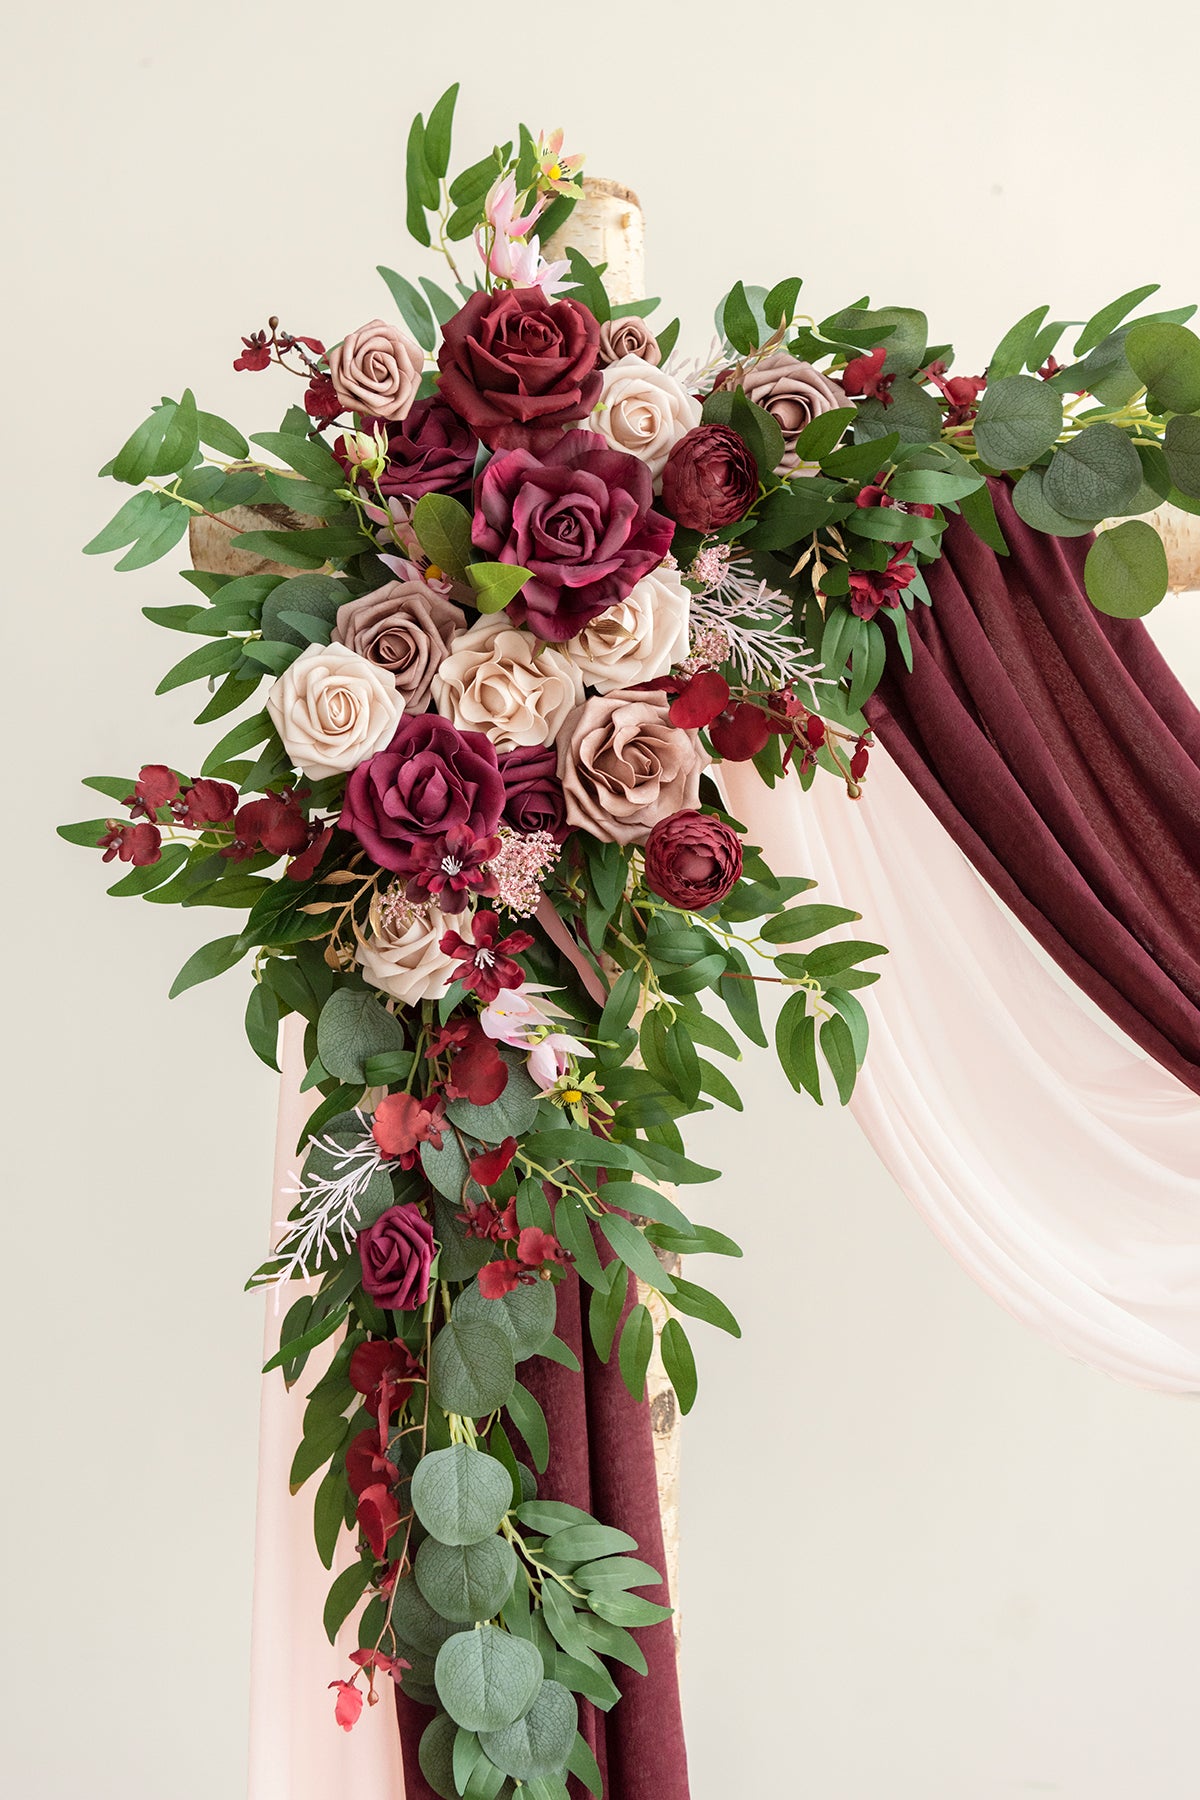 Flower Arch Decor with Drapes in Romantic Marsala | Clearance